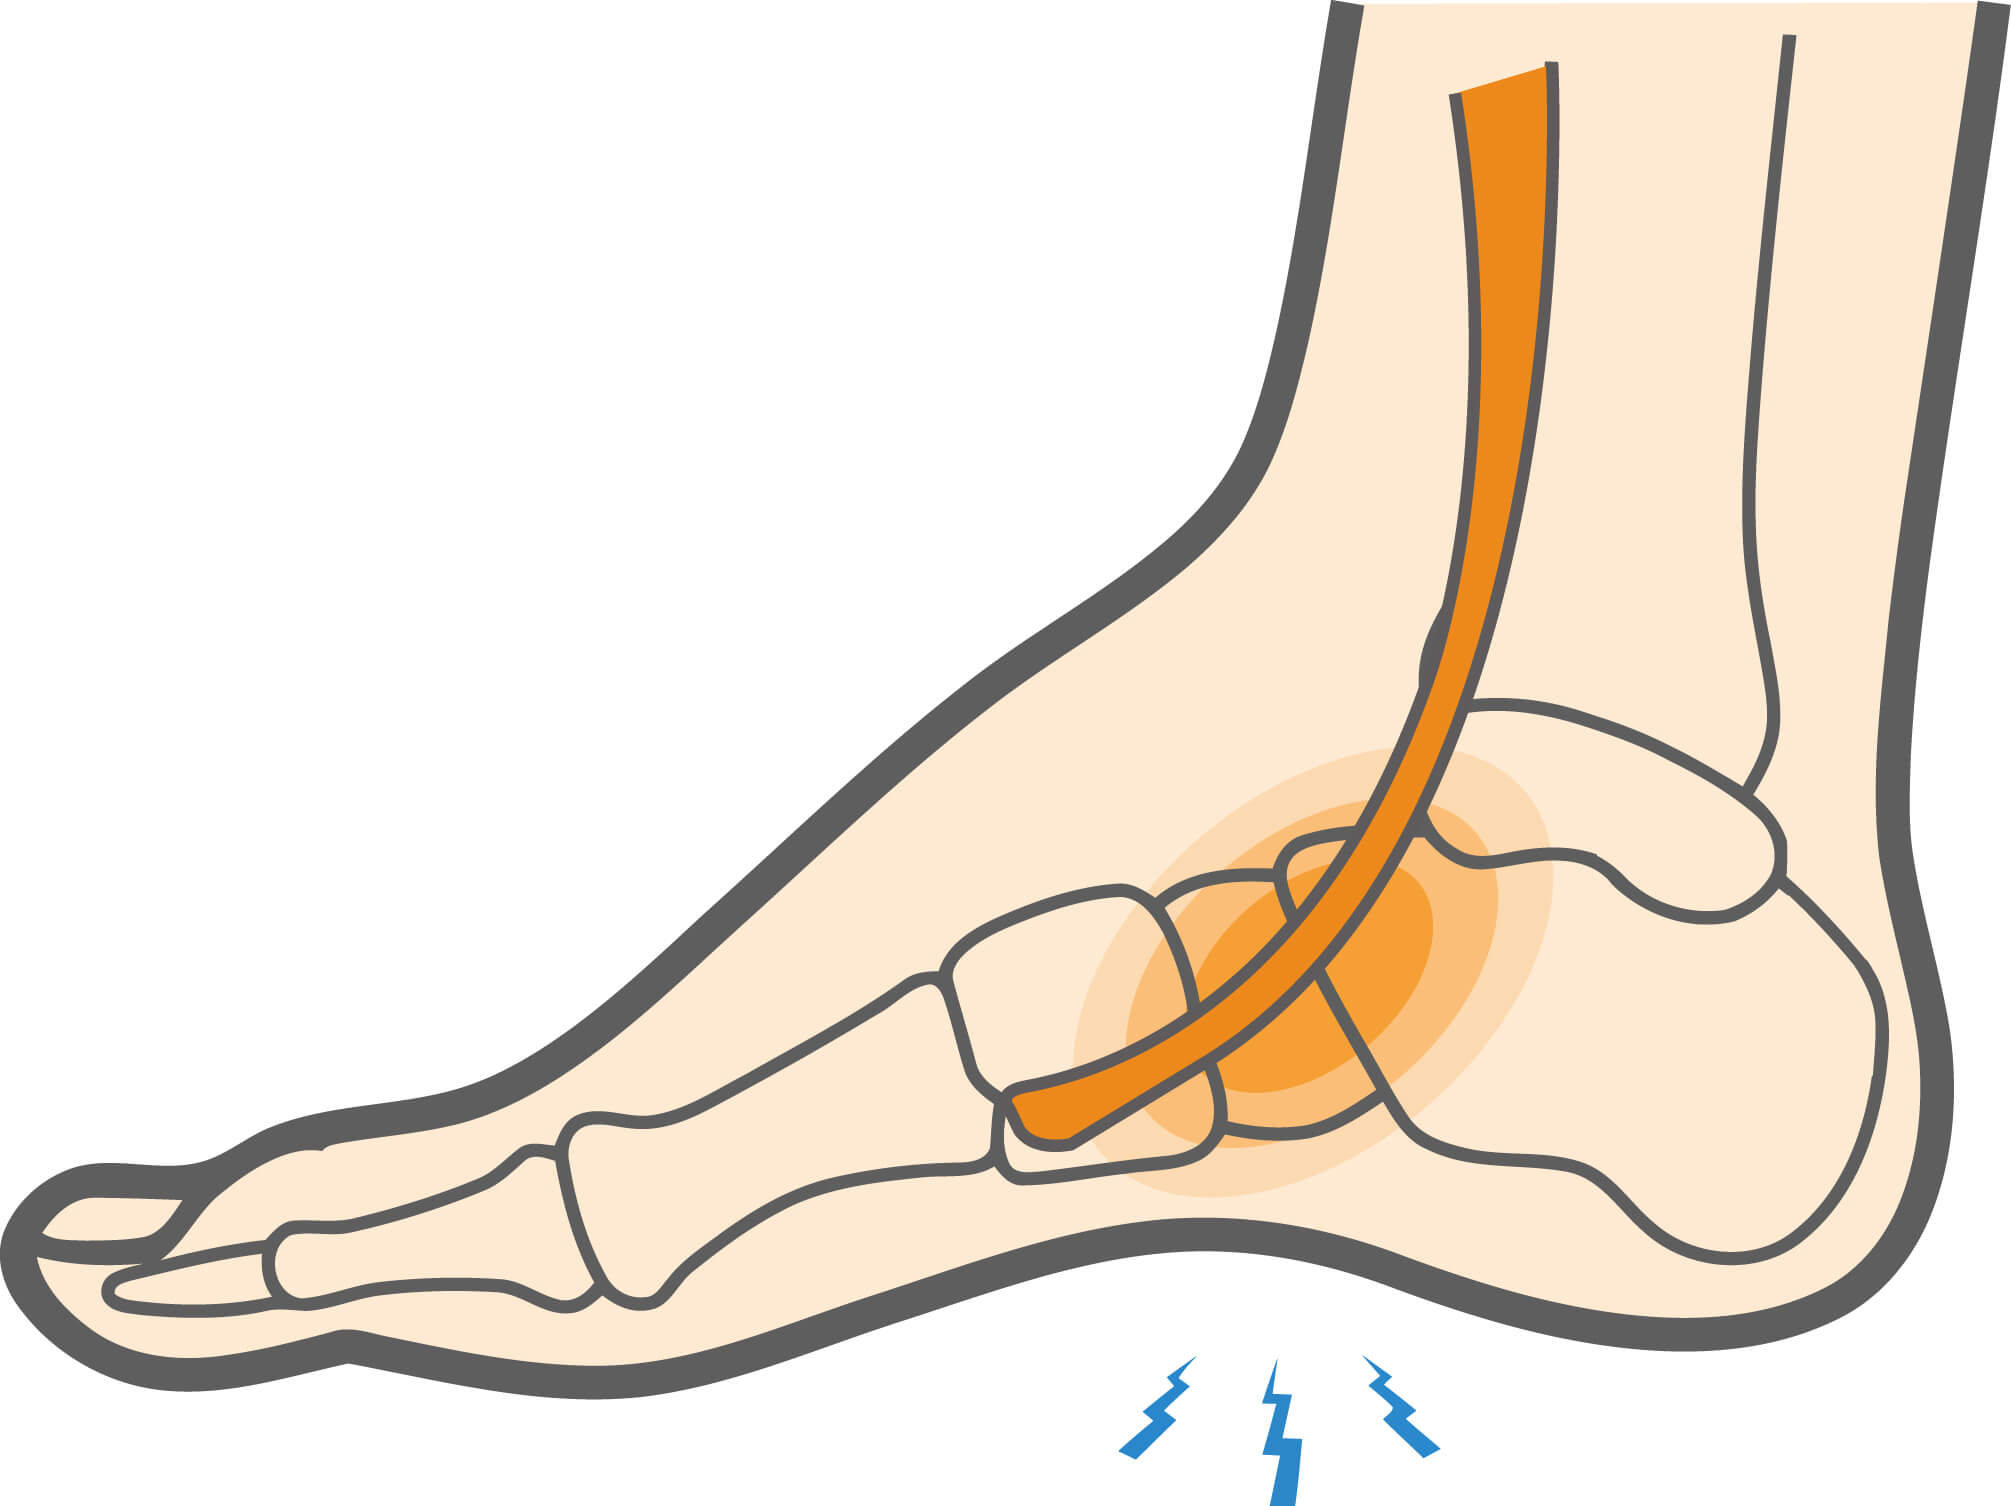 What Is Extensor Tendonitis in the Foot? - DFW Wound Care Center